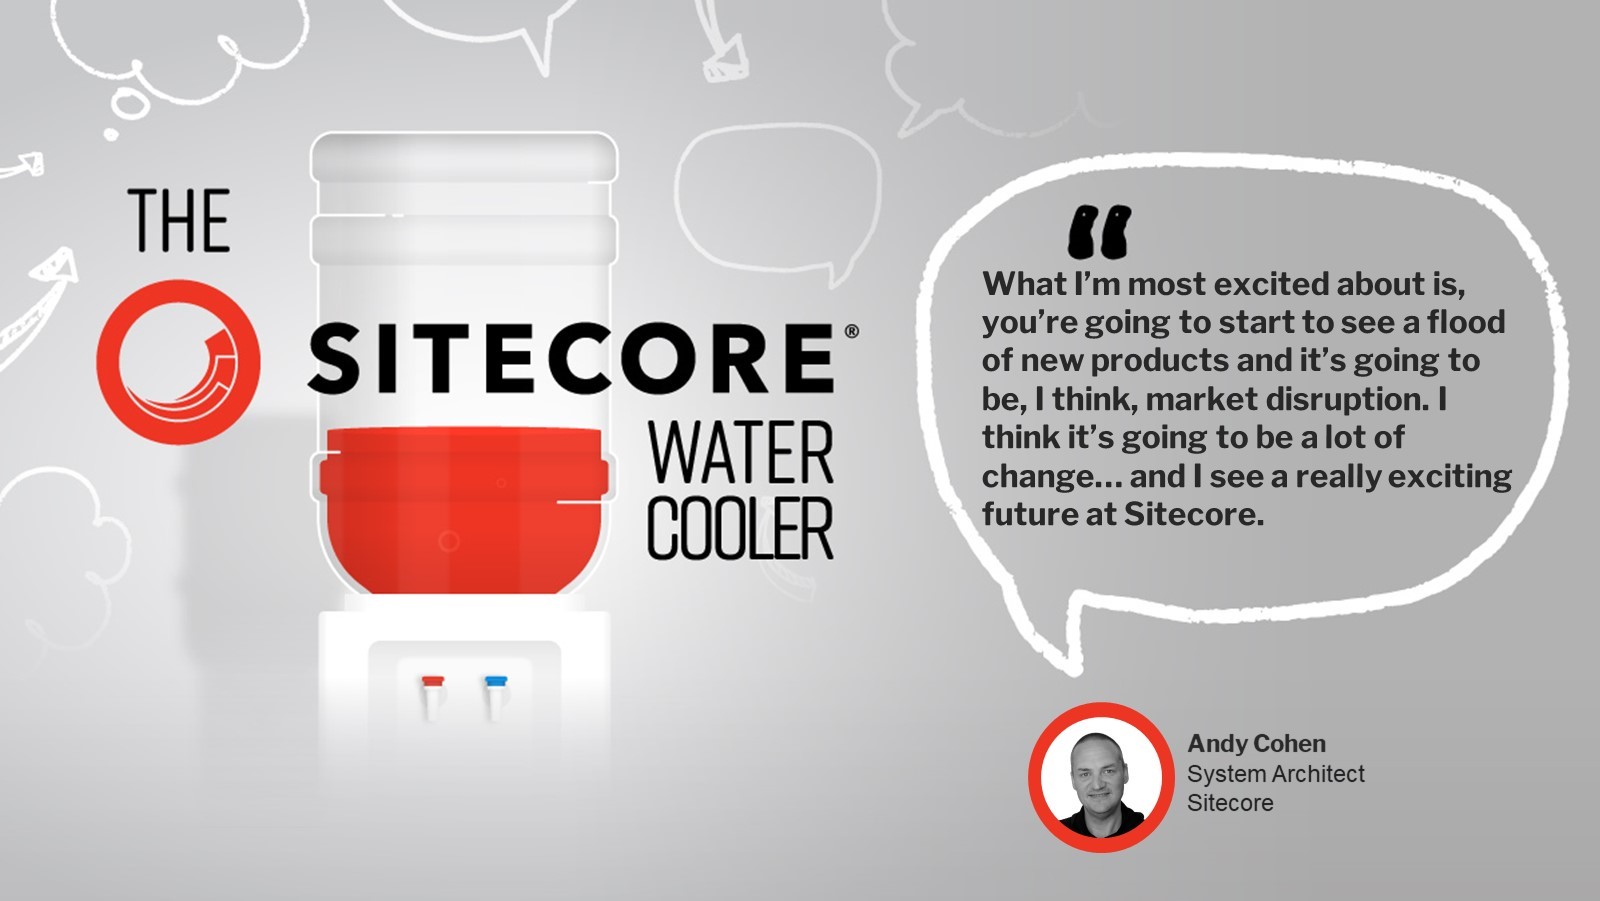 Andy Cohen quote on the future of sitecore